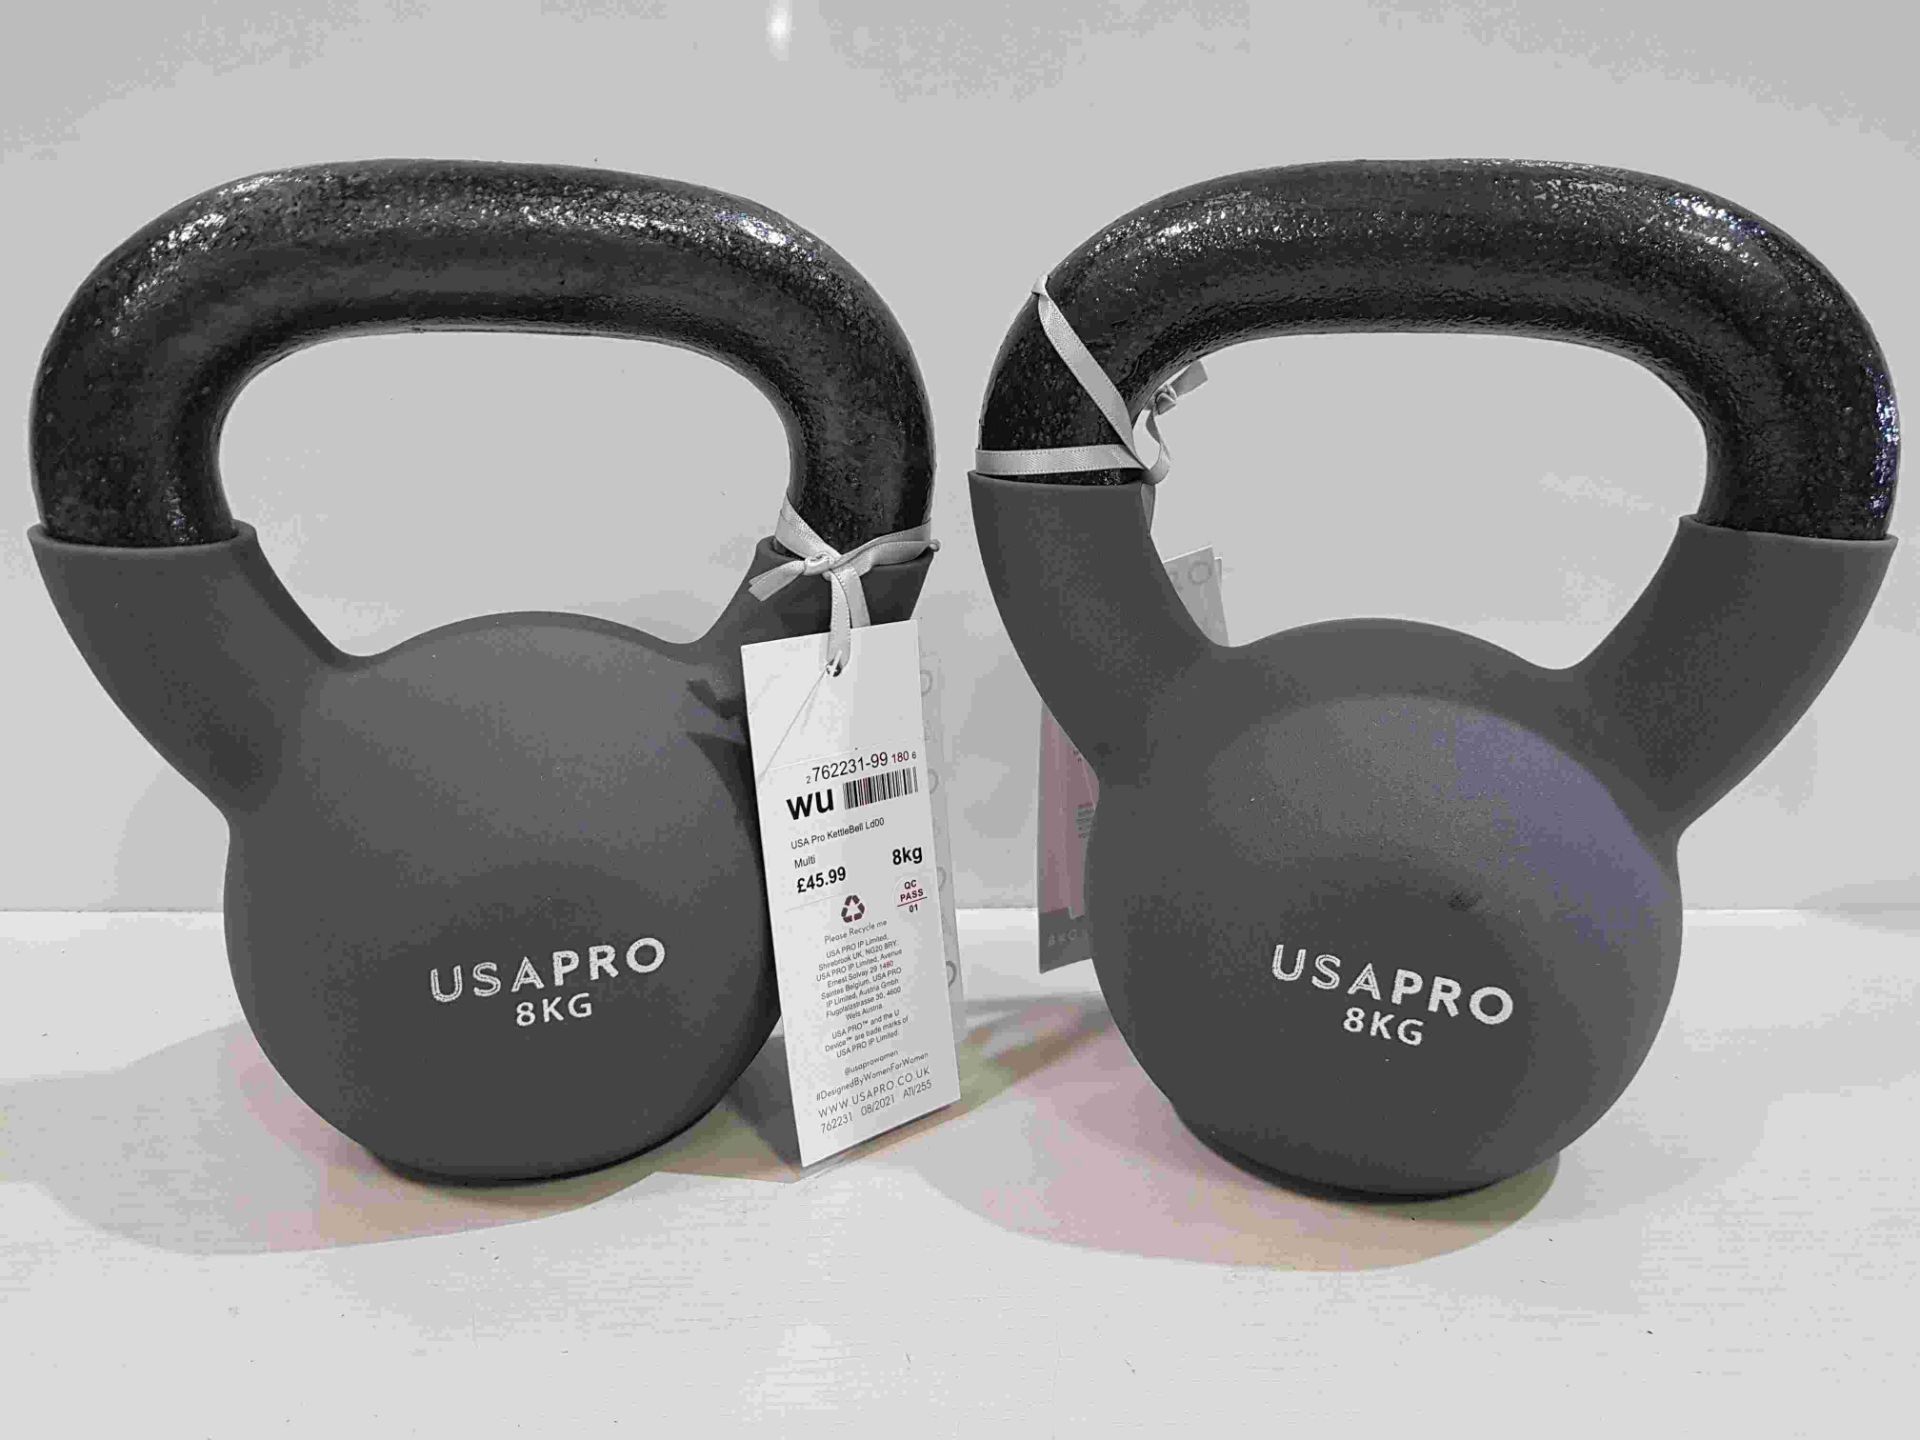 20 X BRAND NEW USA PRO 8KG KETTLE BELLS (10 PAIRS) RRP-£45.99 PP - RRP£ 91.98 FOR PAIR - TOTAL RRP £